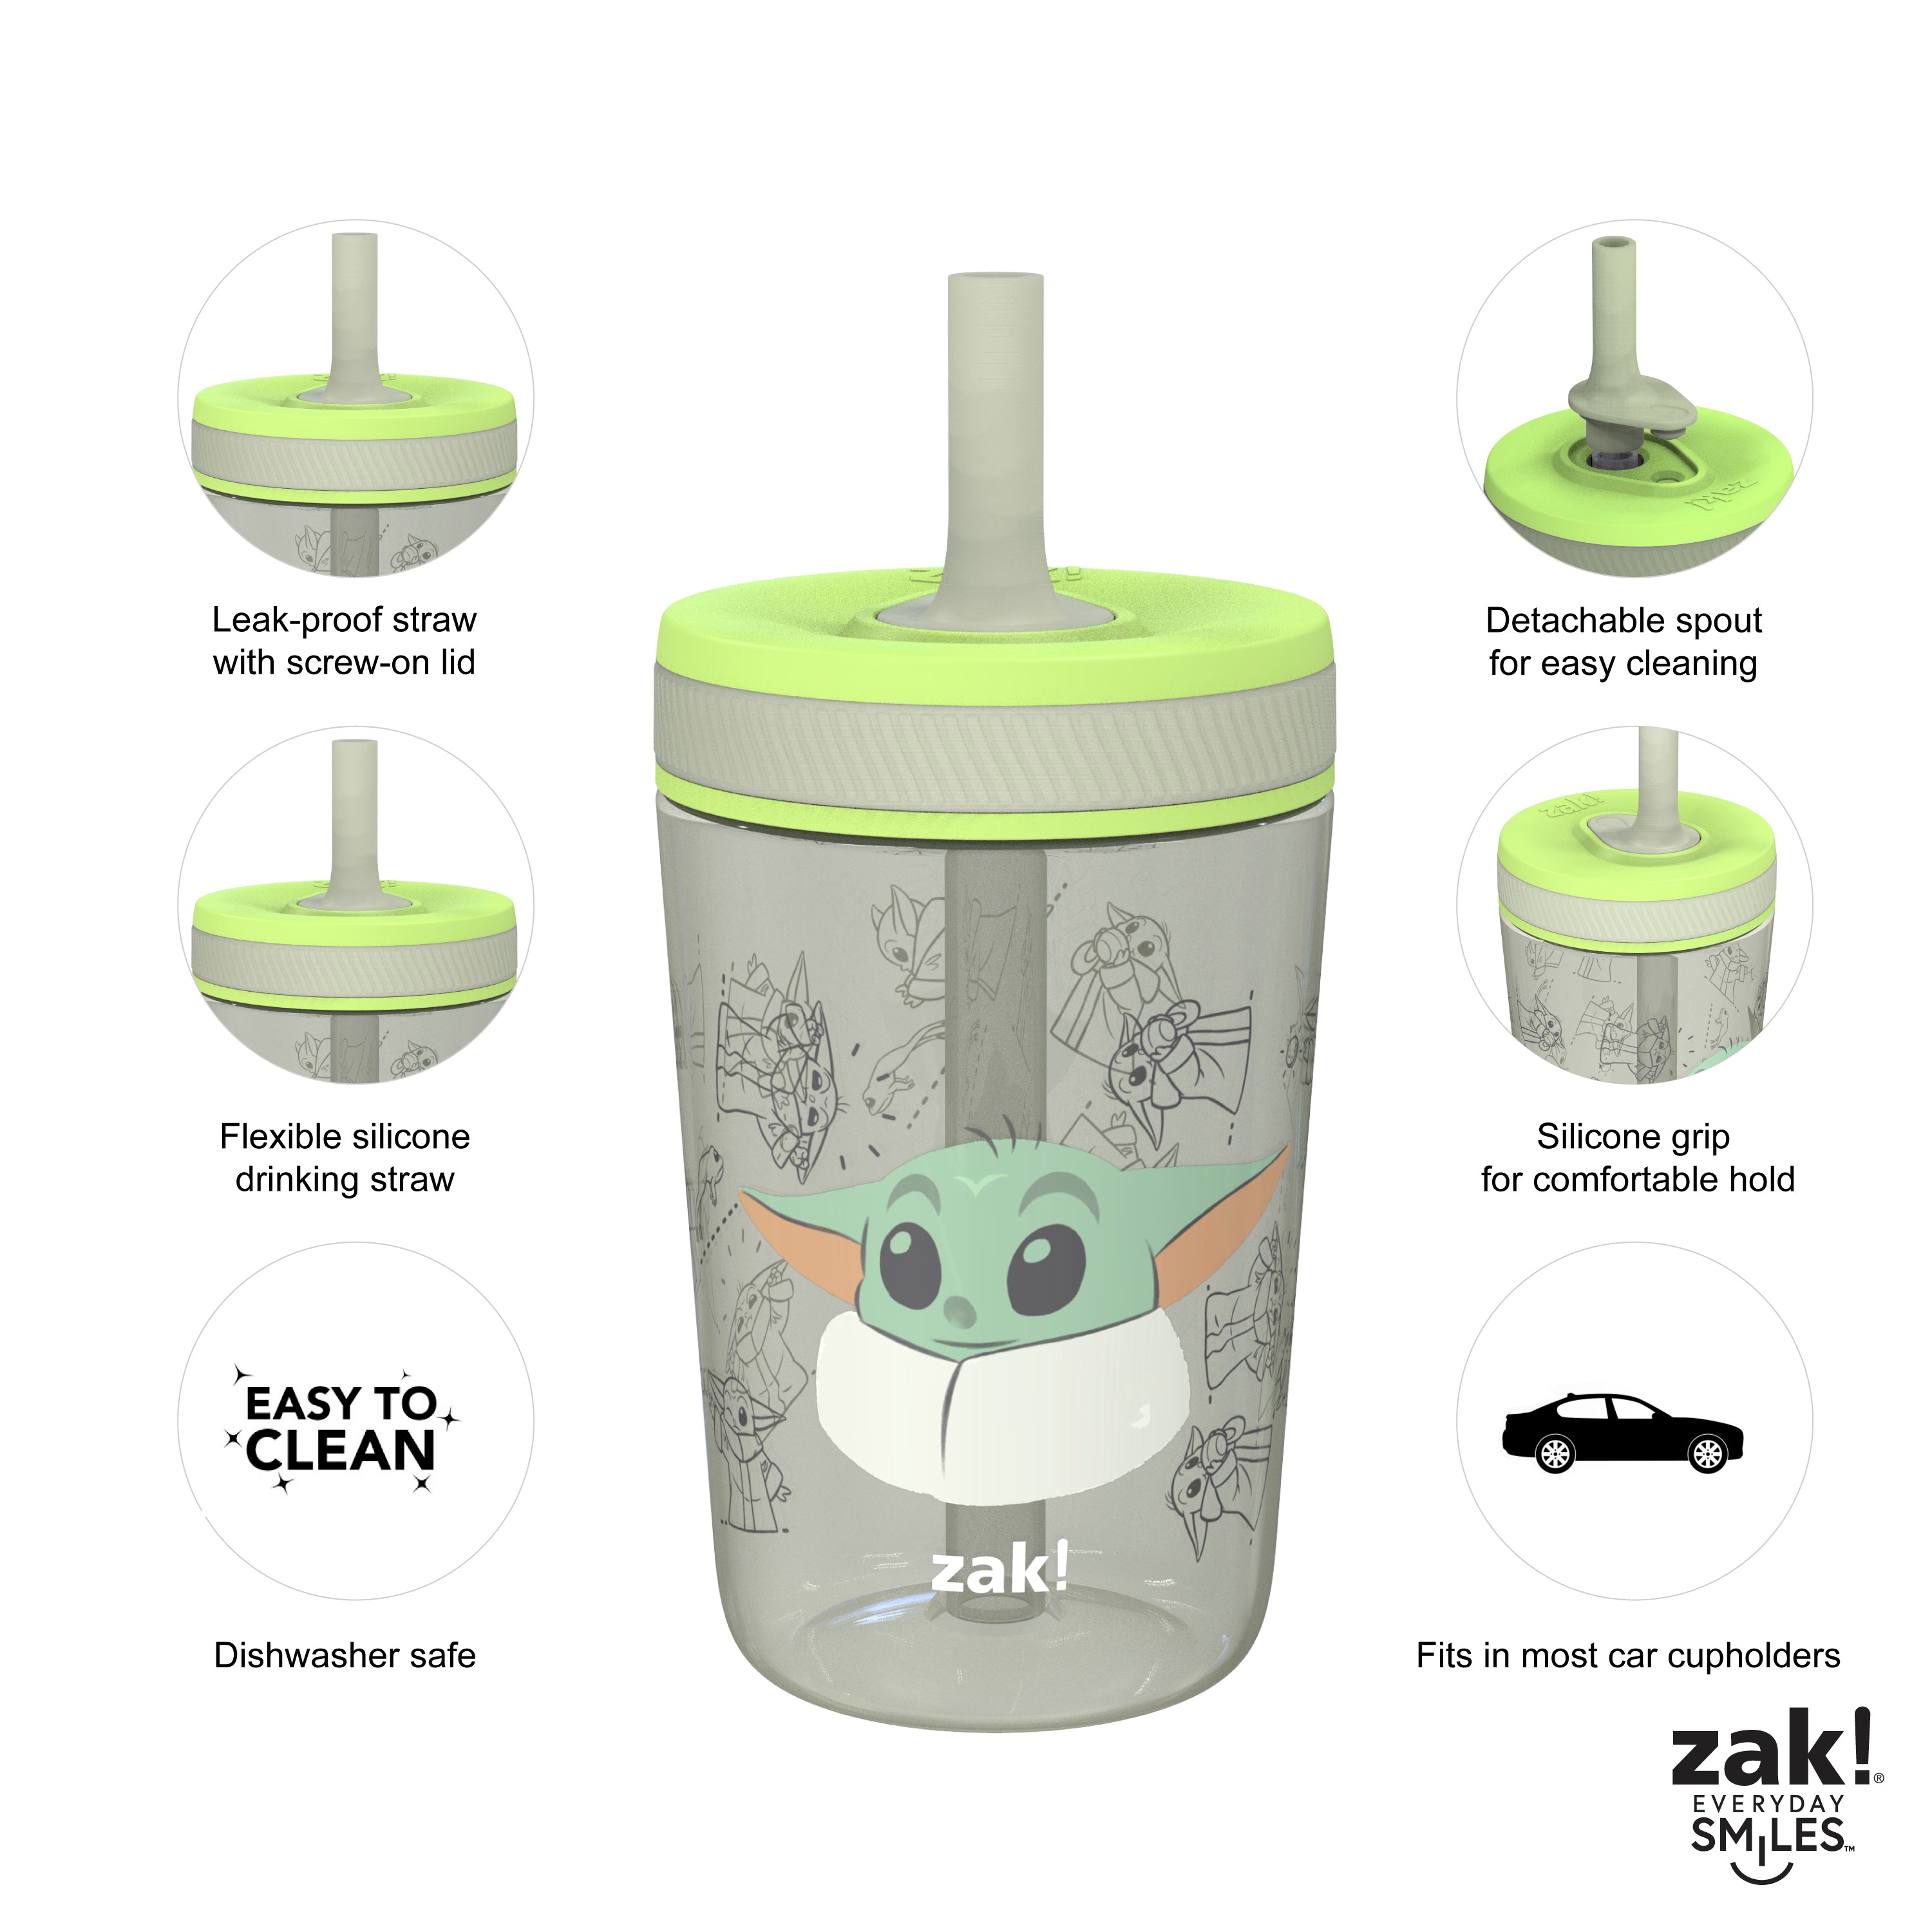 Unicorn and Happy Skies Kelso Kids Leak Proof Tumbler with Lid and Straw - 15 Ounces